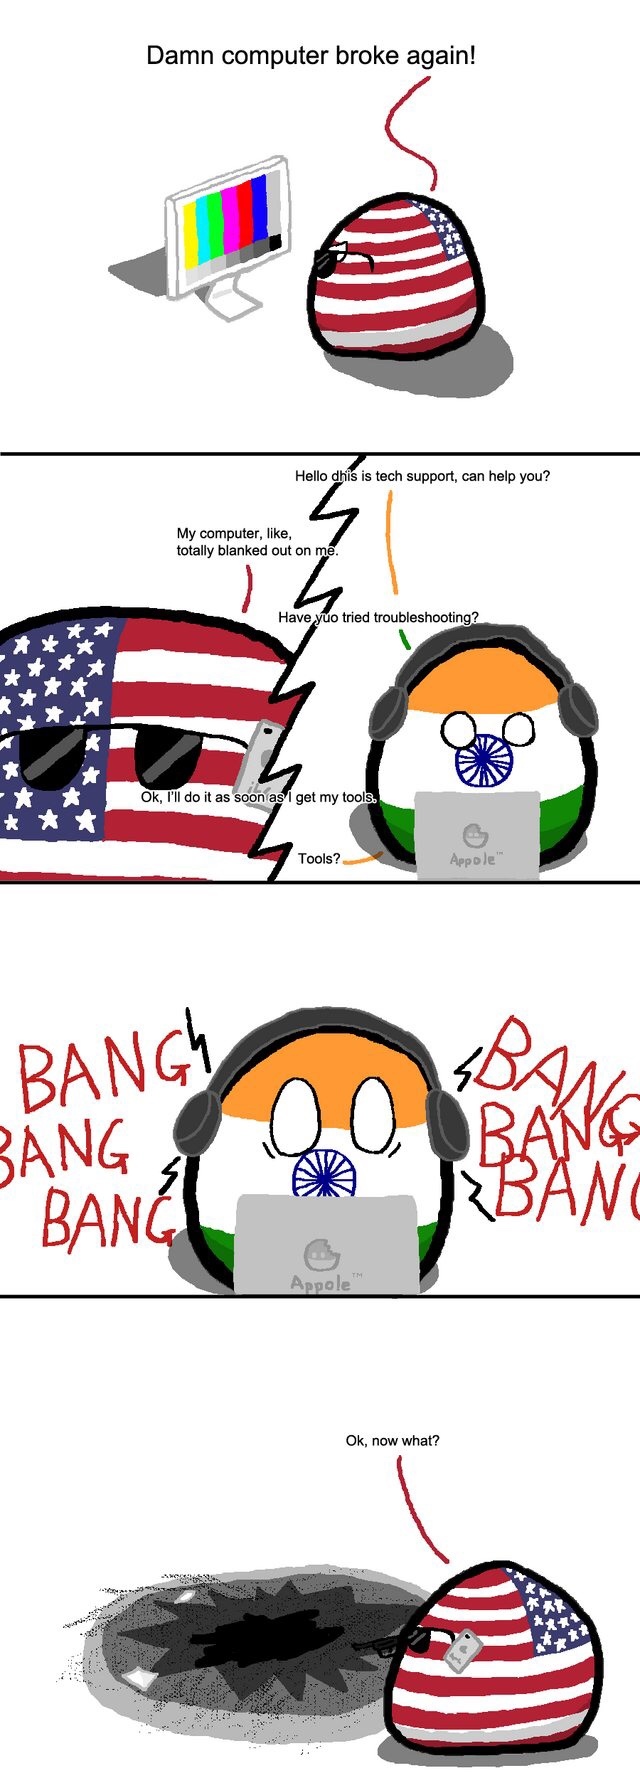 *In best Indian voice*  Have you tried troubleshooting your computer sir? - meme